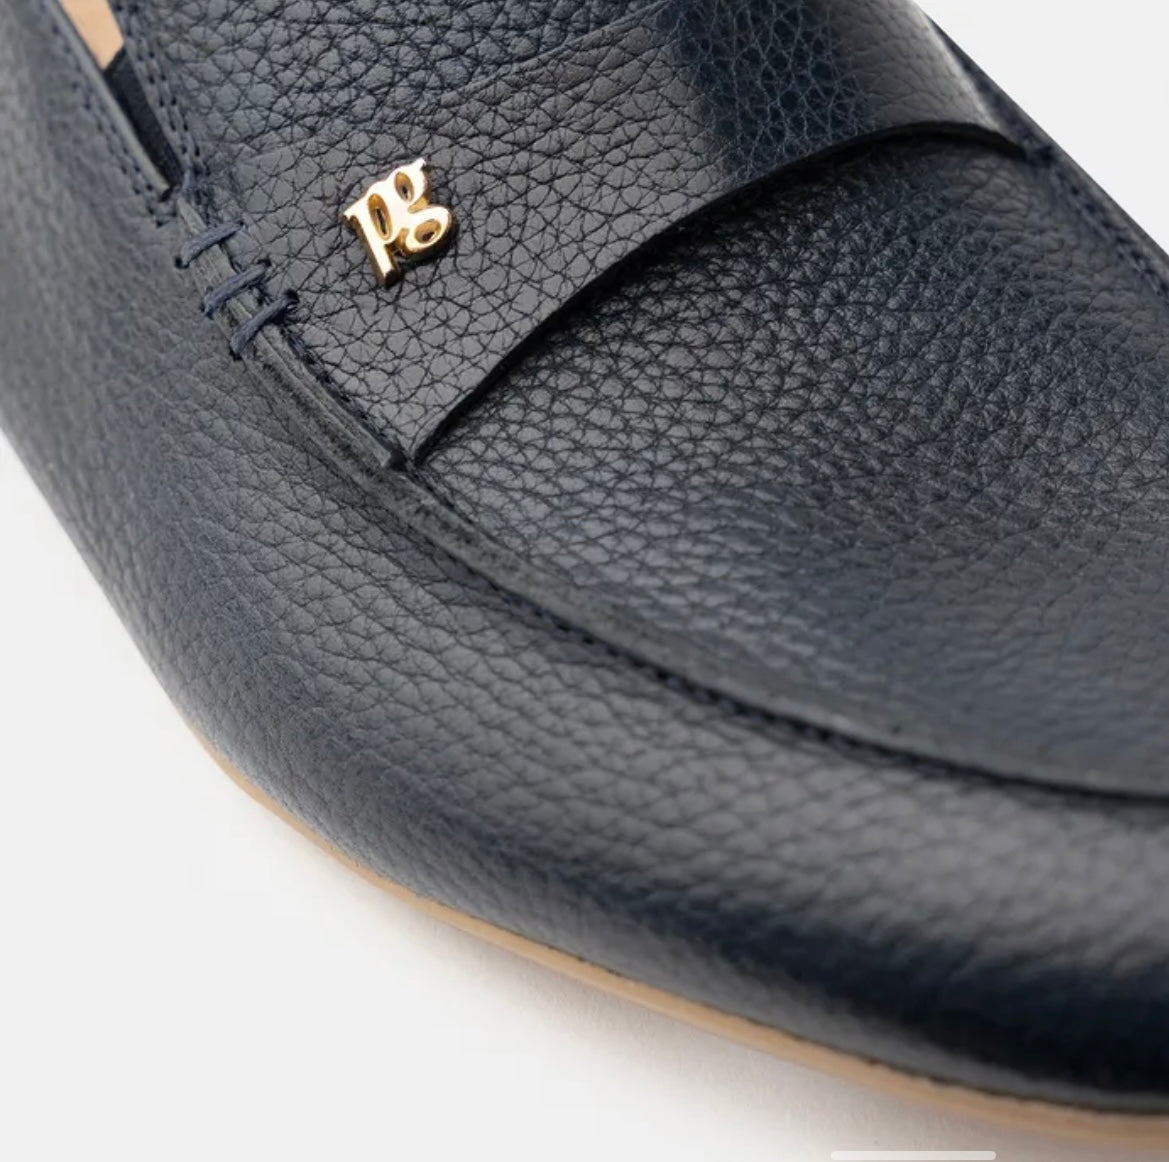 Paul Green navy loafers